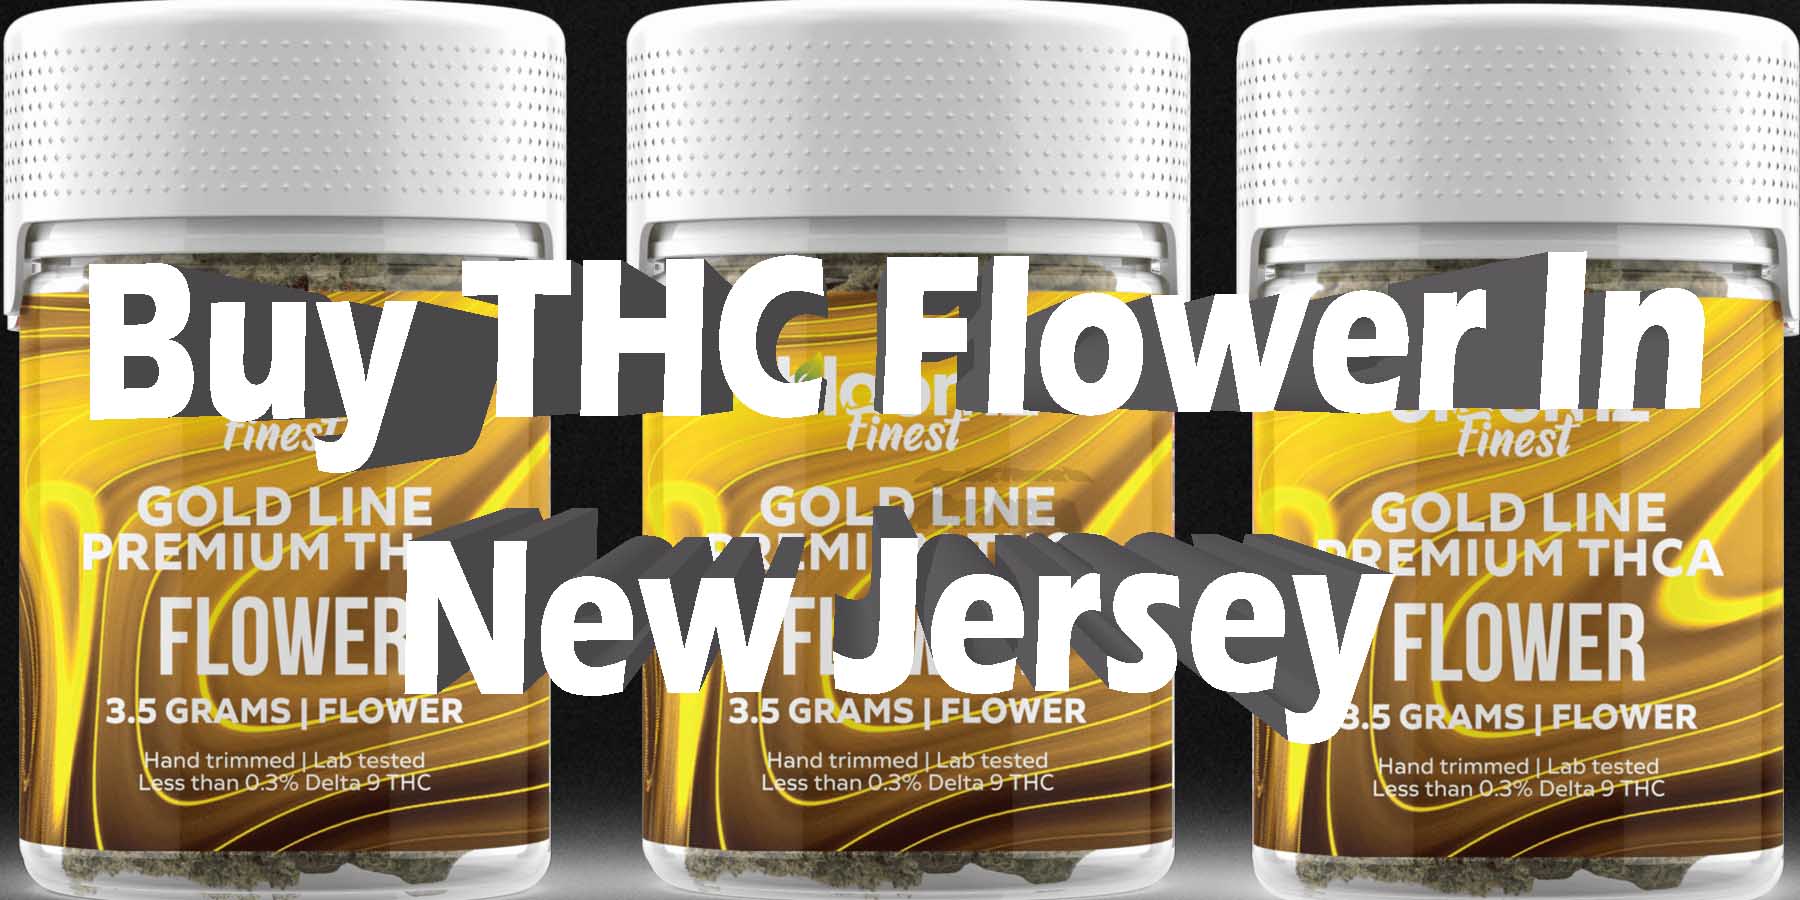 Buy THC Flower In New Jersey WhereToGet HowToGetNearMe BestPlace LowestPrice Coupon Discount For Smoking Best High Smoke Shop Online Near Me StrongestBrand BestBrand Binoid